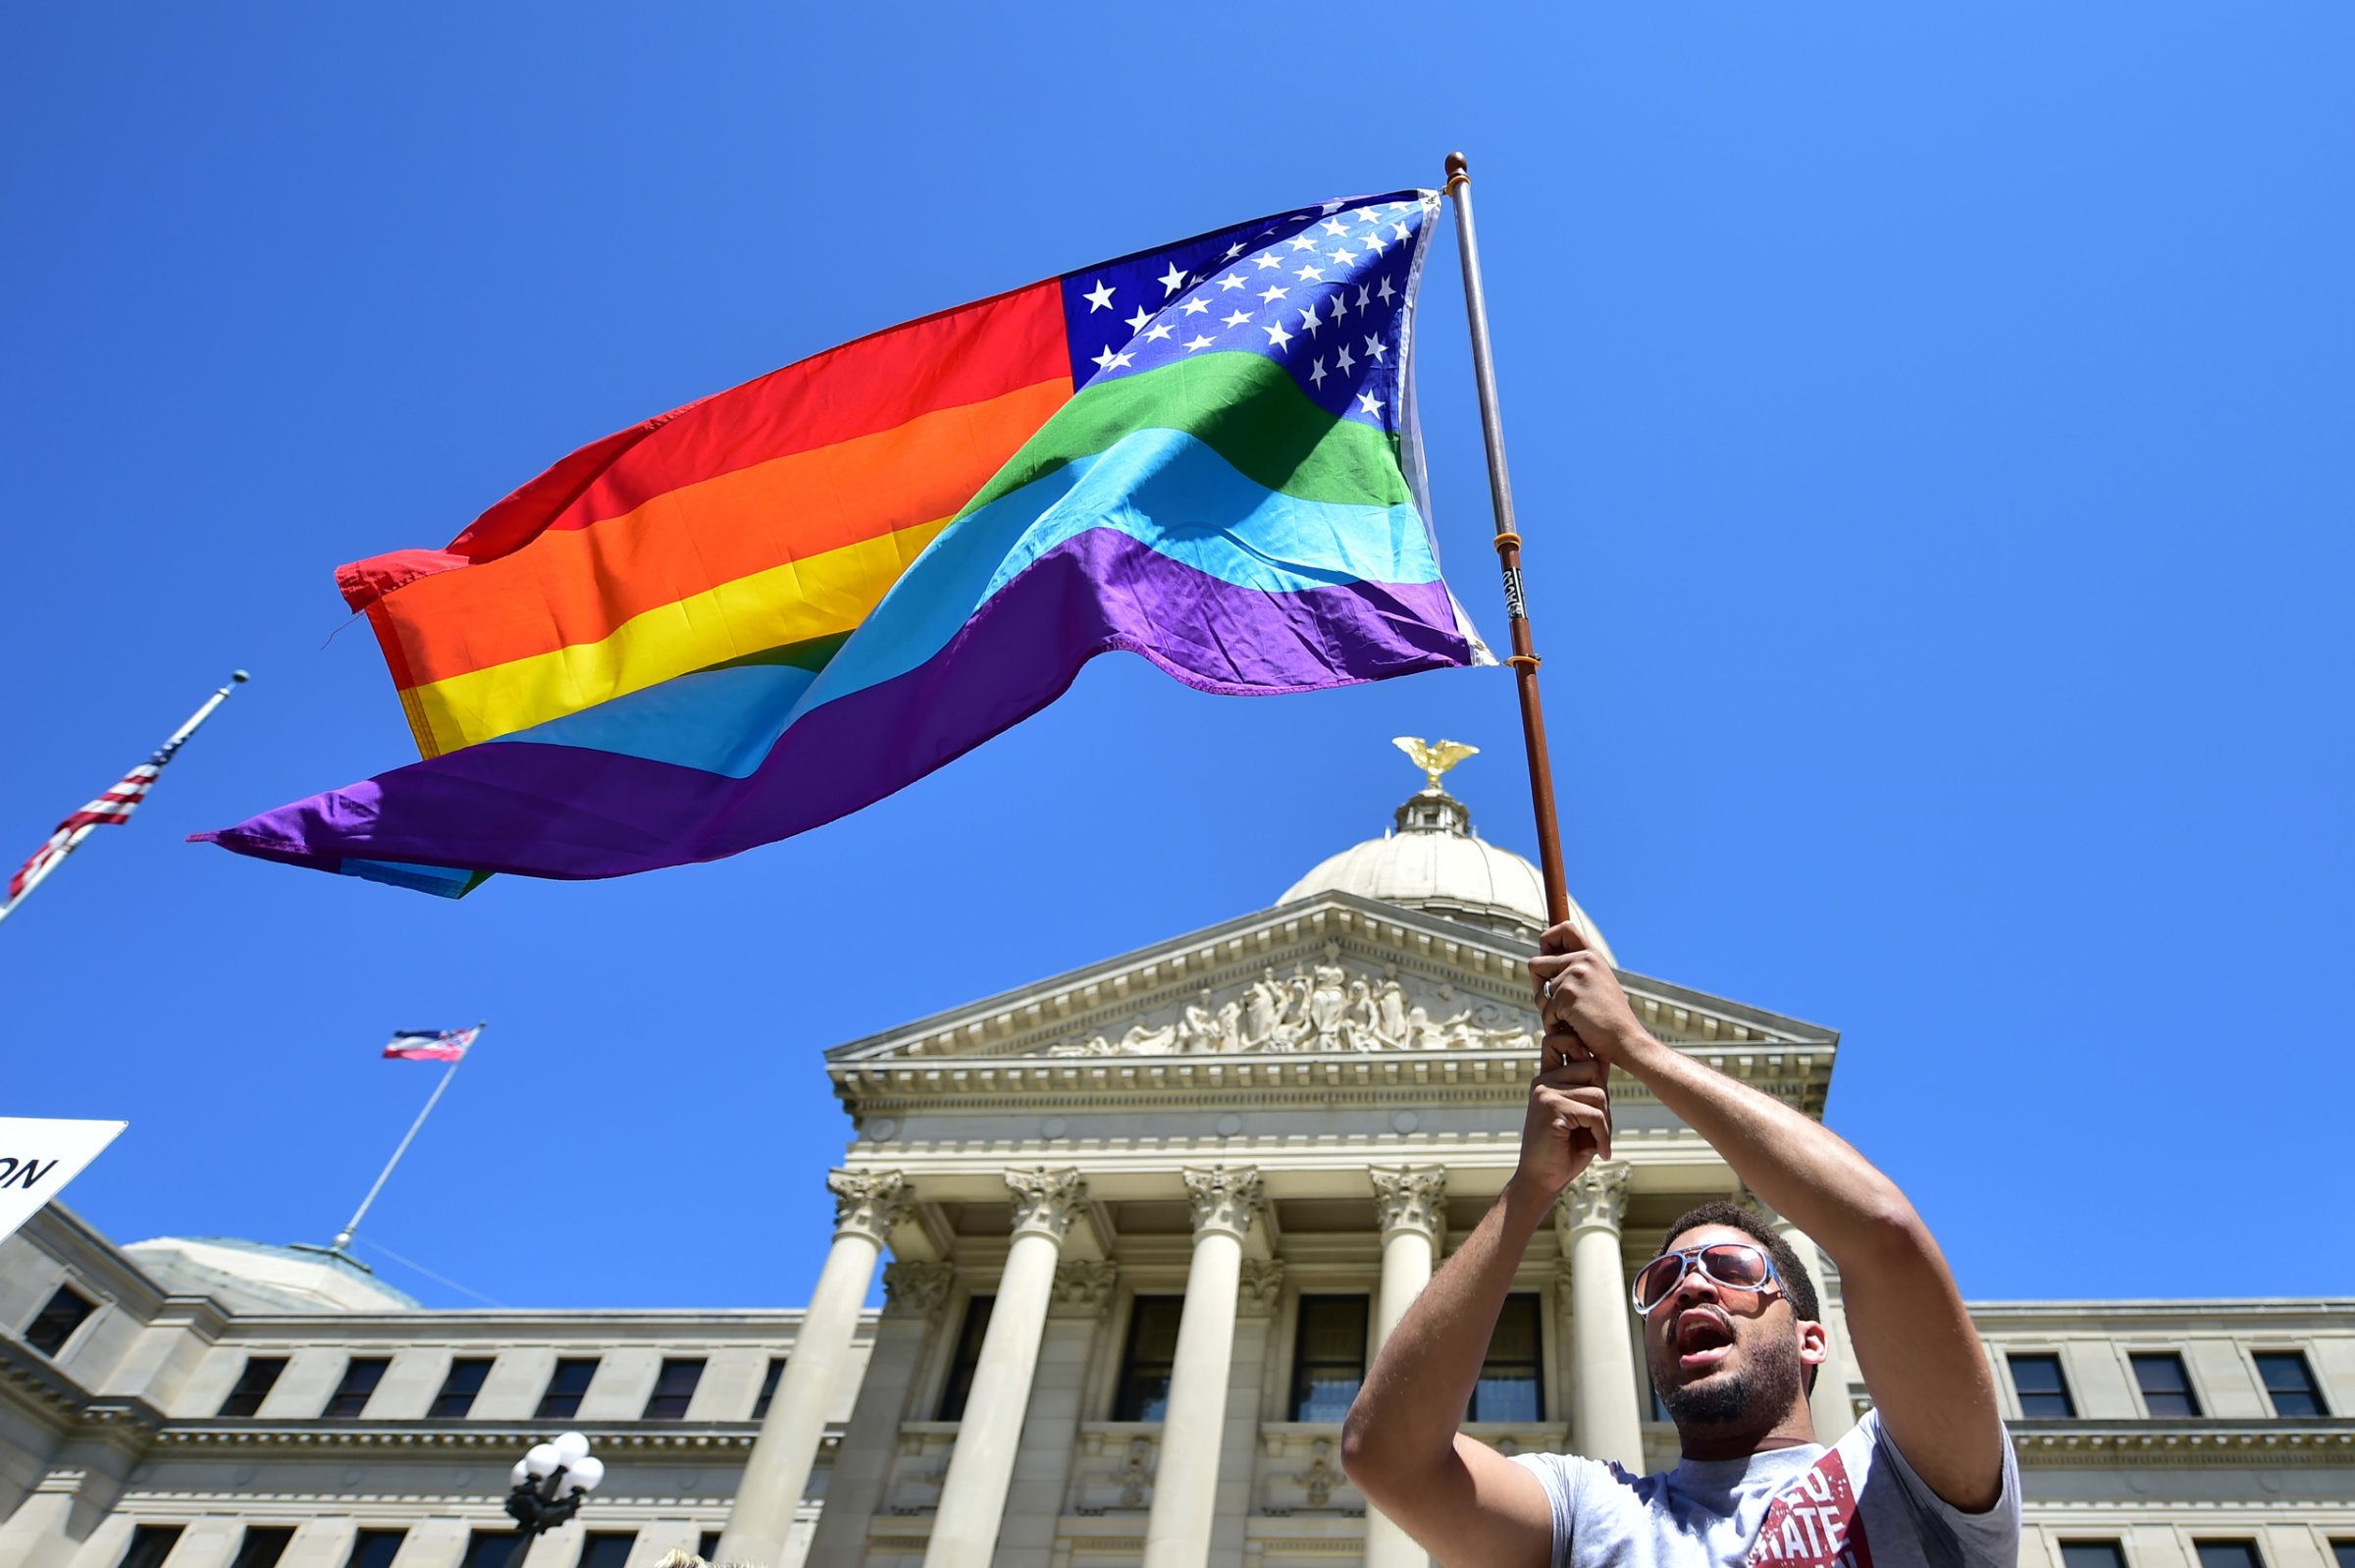 Meridian resident Nykolas Alford waves a rainbow-colored flag designed with the U.S. flag during a Human Rights Campaign protest of House Bill 1523 on the Mississippi State Capitol steps in Jackson, Miss., Tuesday, March 29, 2016. (Justin Sellers/The Clarion-Ledger via AP) MANDATORY CREDIT